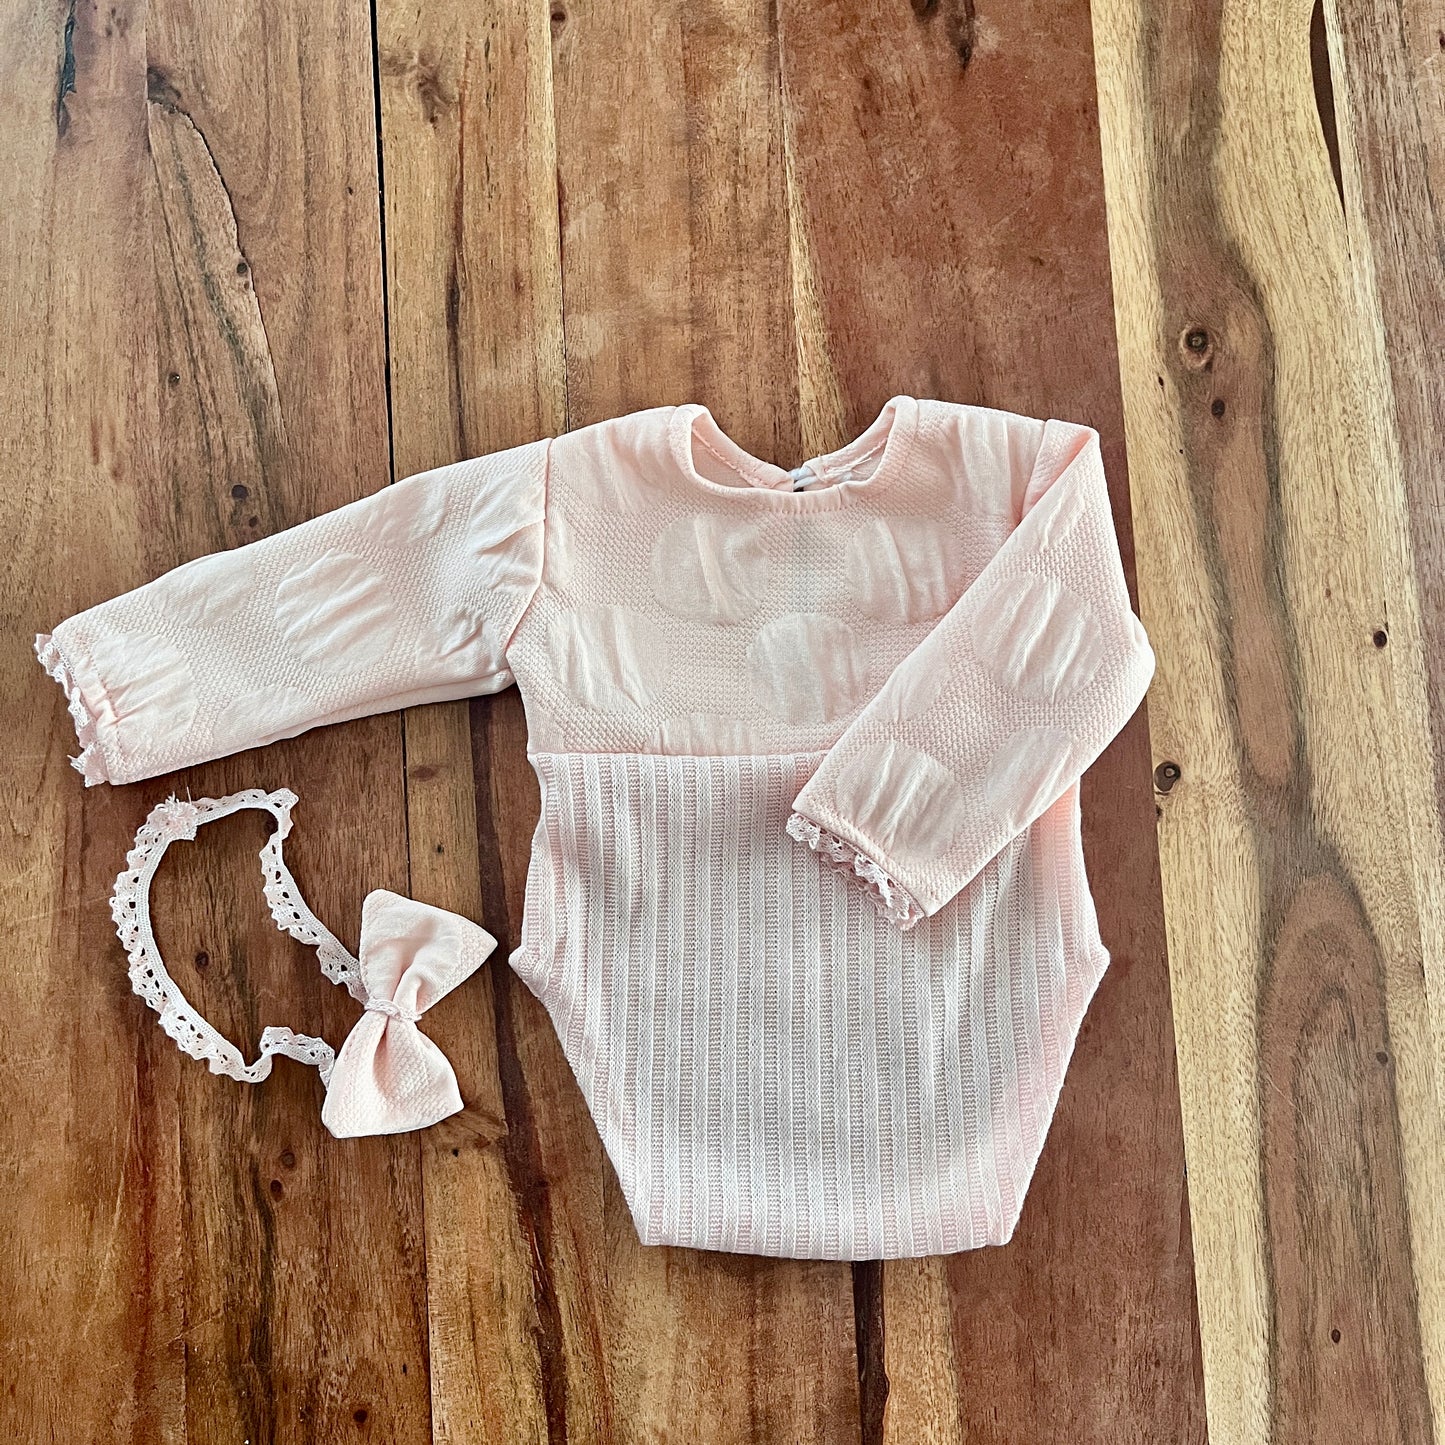 Anabelle Pink  Newborn Photography Prop Outfit For Girl